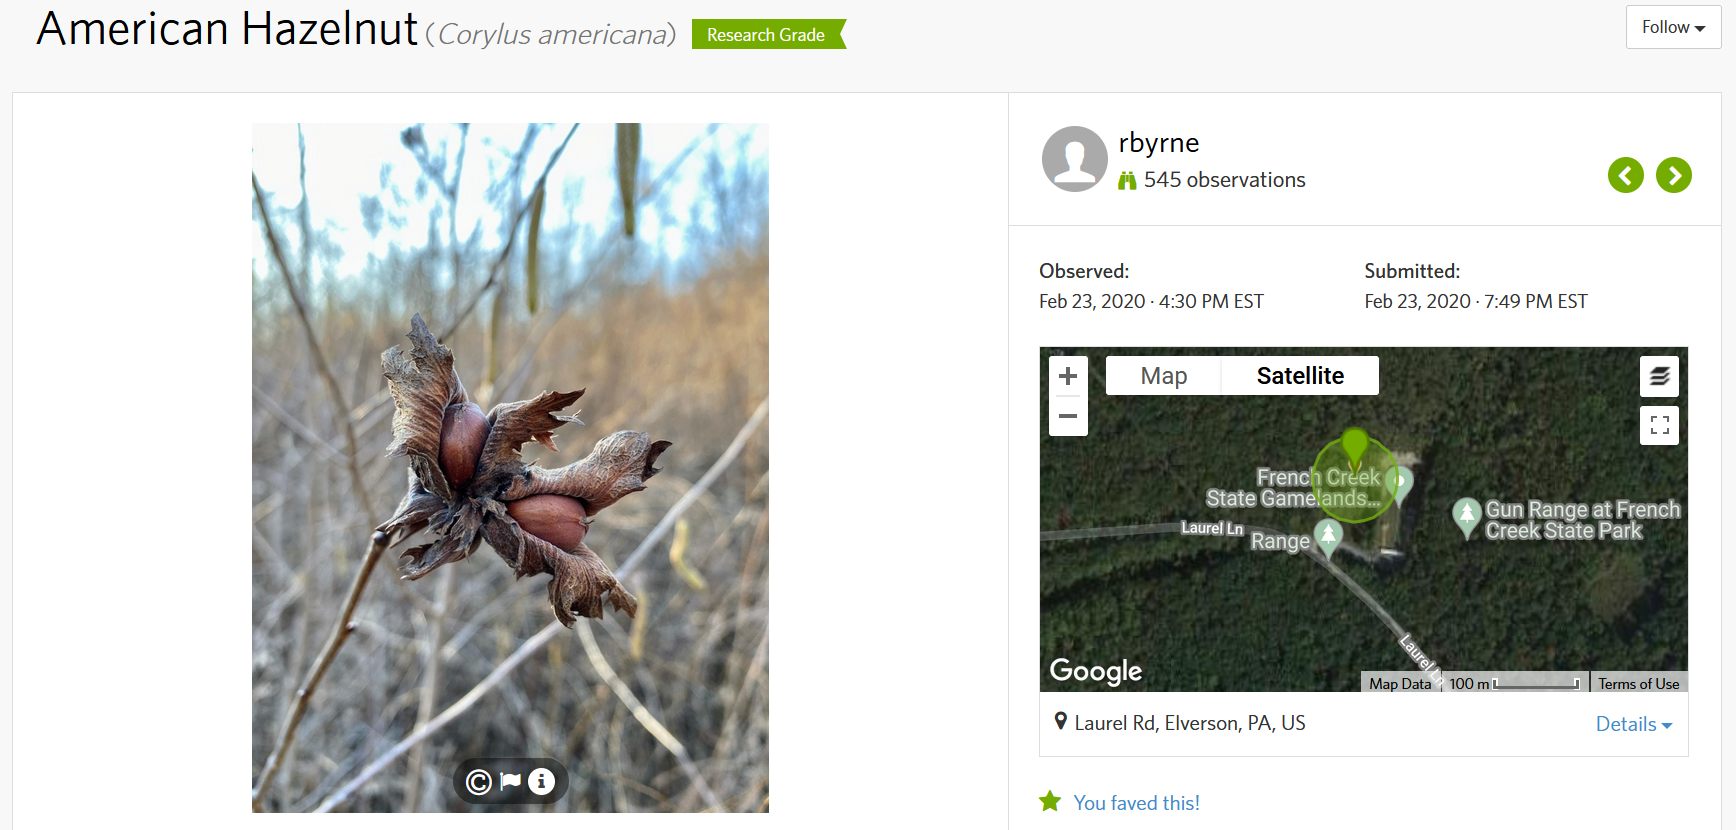 iNaturalist observation page for an American hazelnut in French Creek State Gamelands